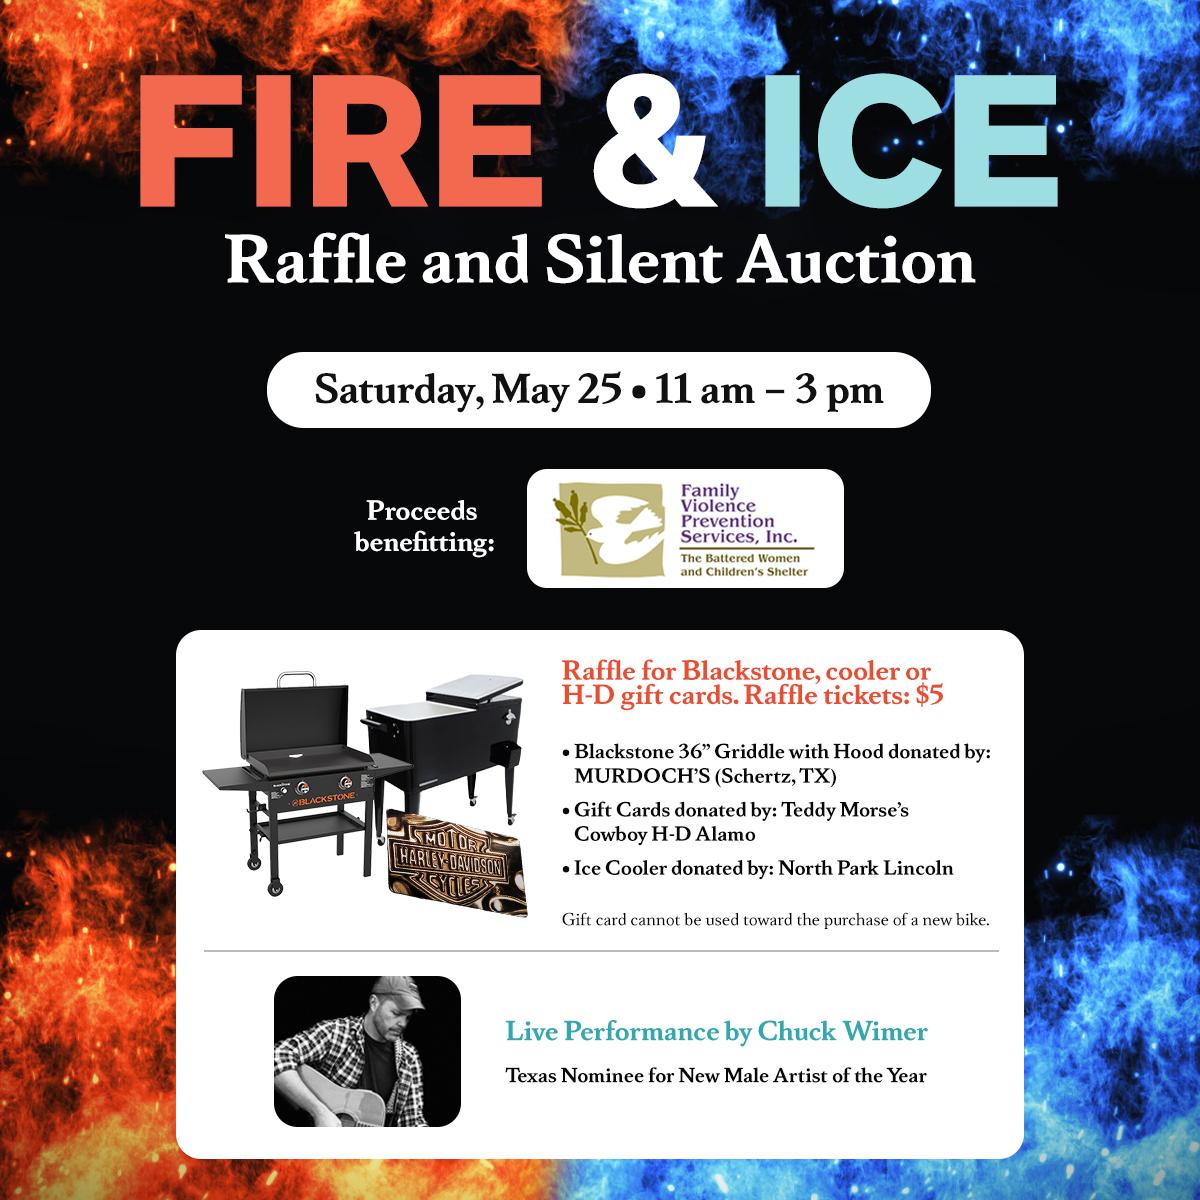 Fire & Ice Raffle and Silent Auction